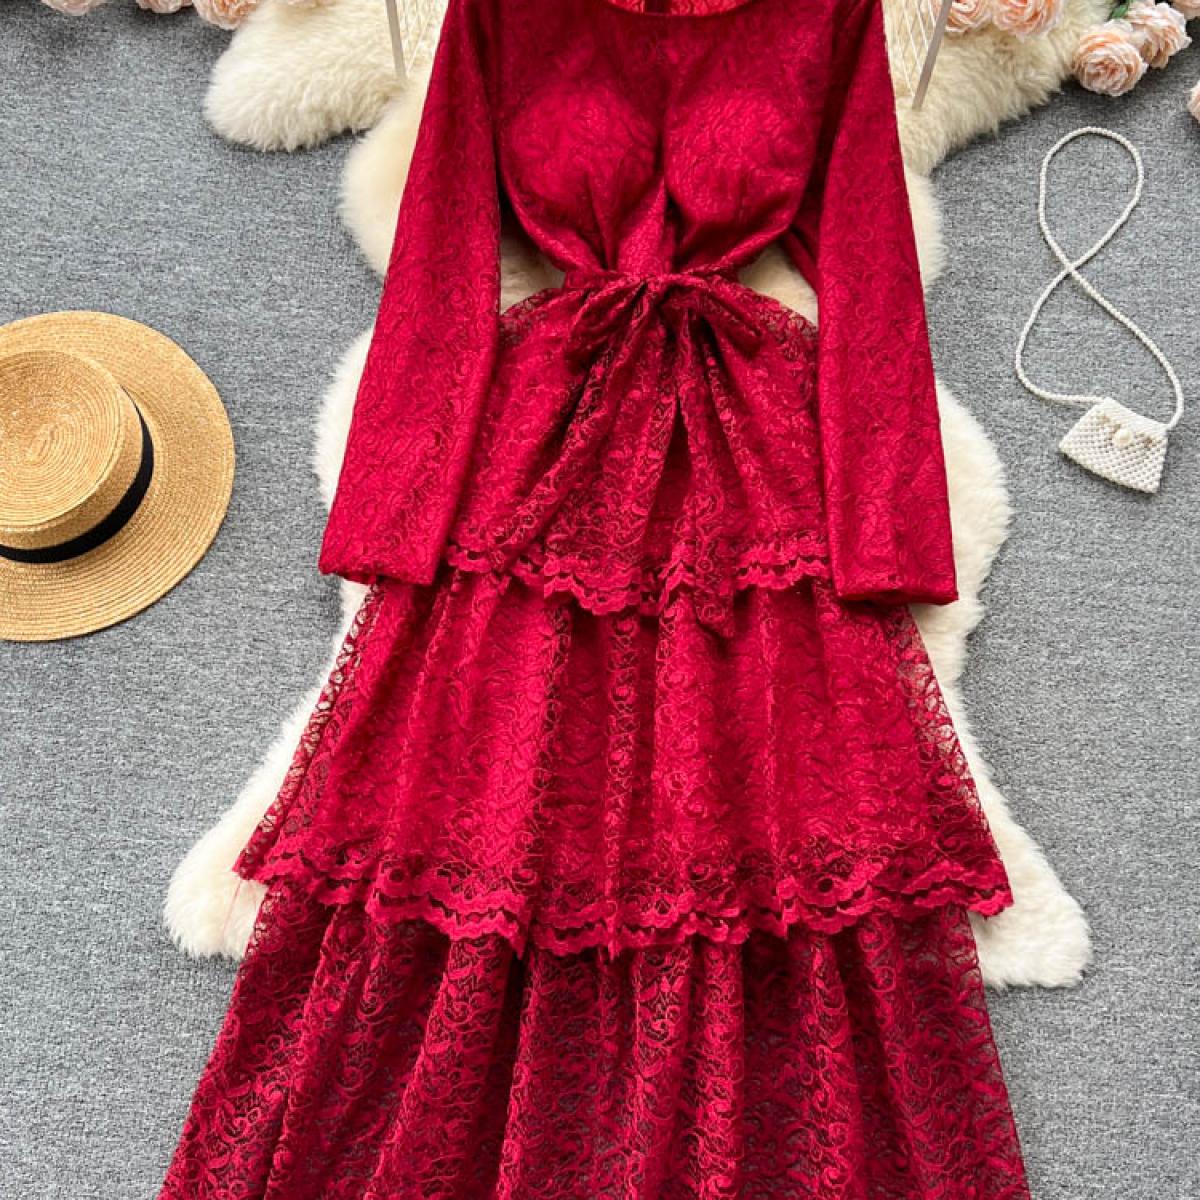 Spring Autumn Vintage Women Embroidery Lace Long Dress Elegant Round Neck High Waist Tierred Ruffle Party Maxi Vestidos 